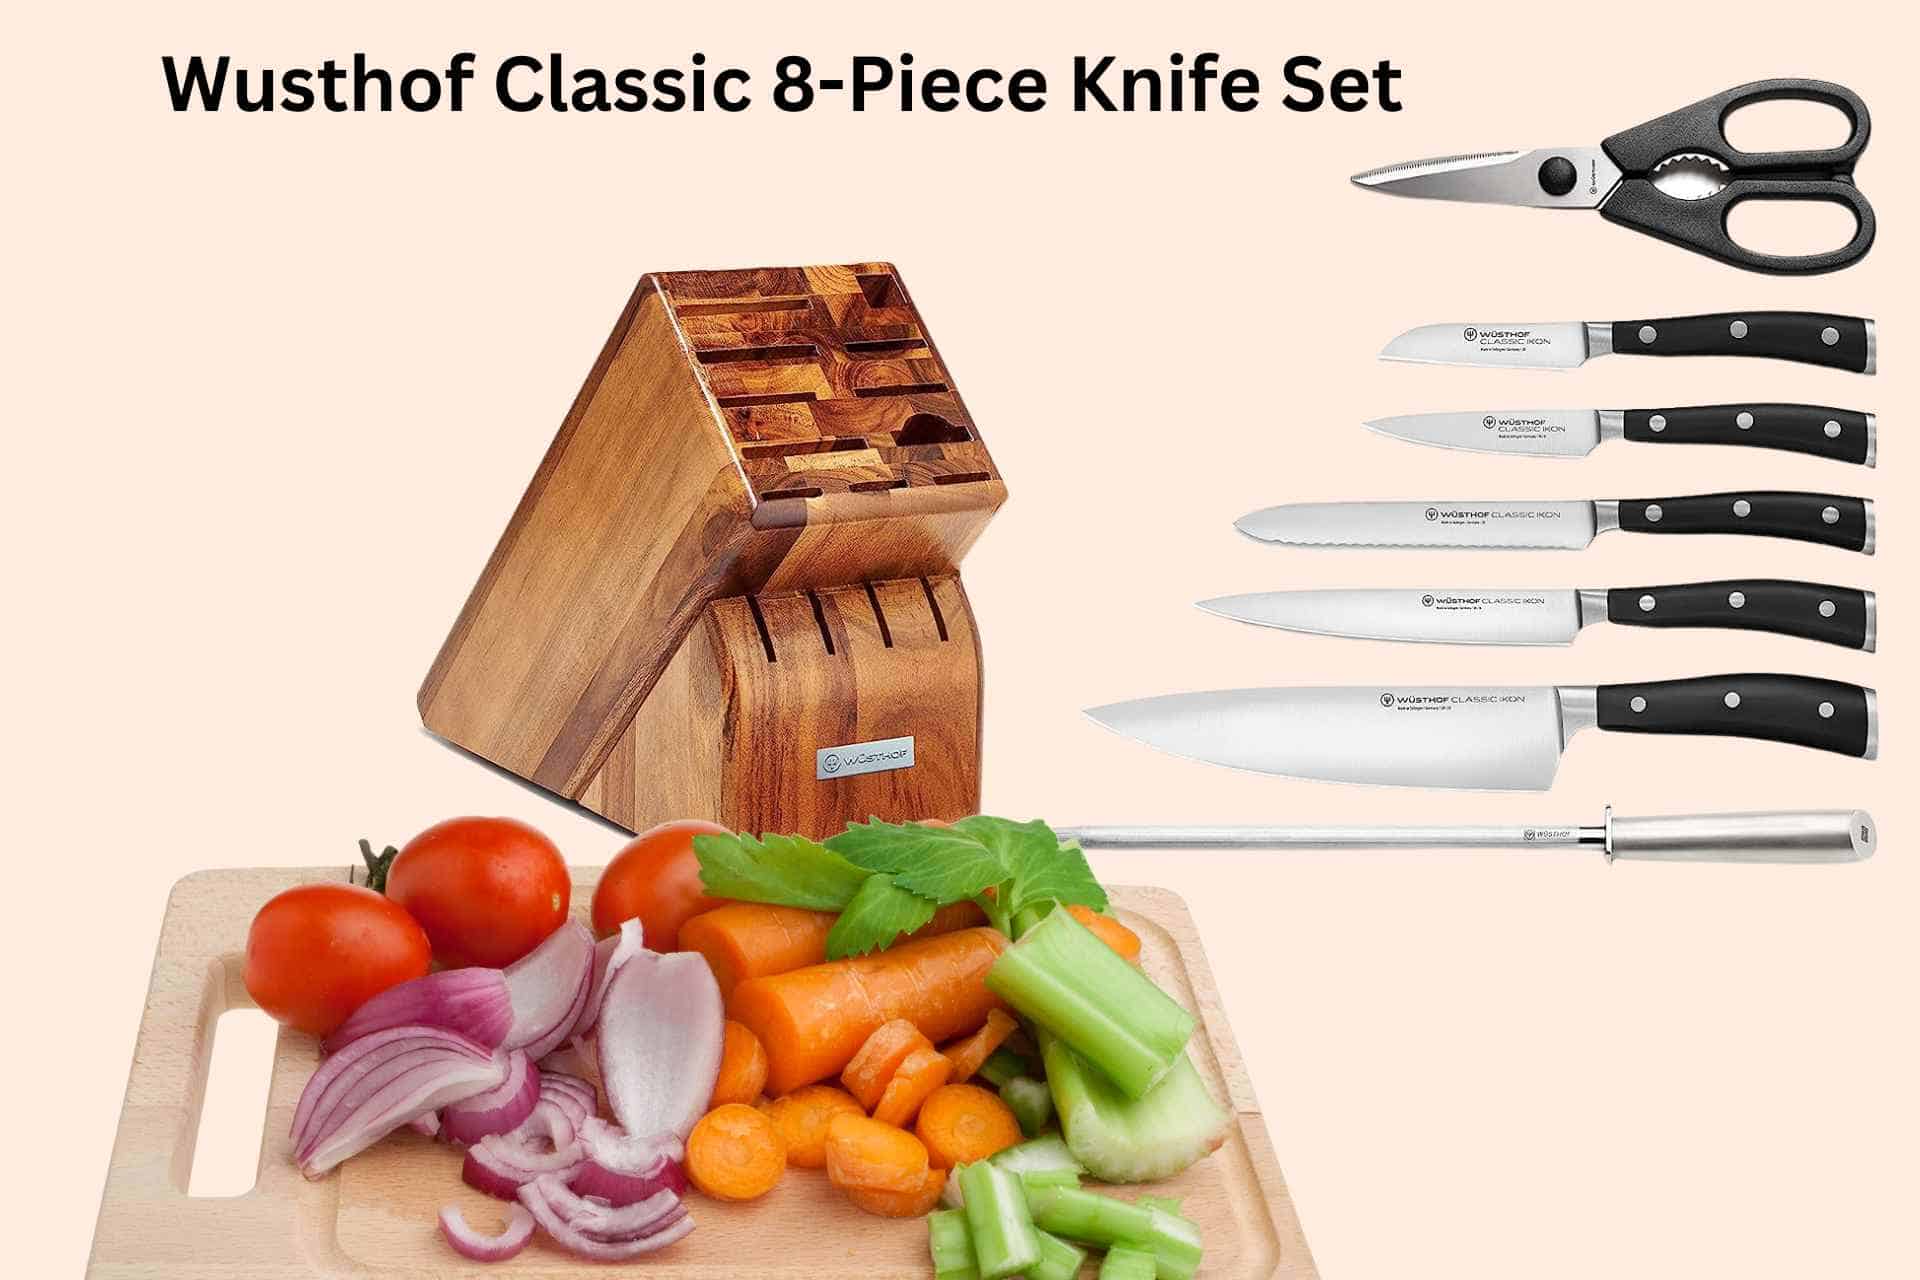 Wusthof Classic 8-Piece Knife Set Review